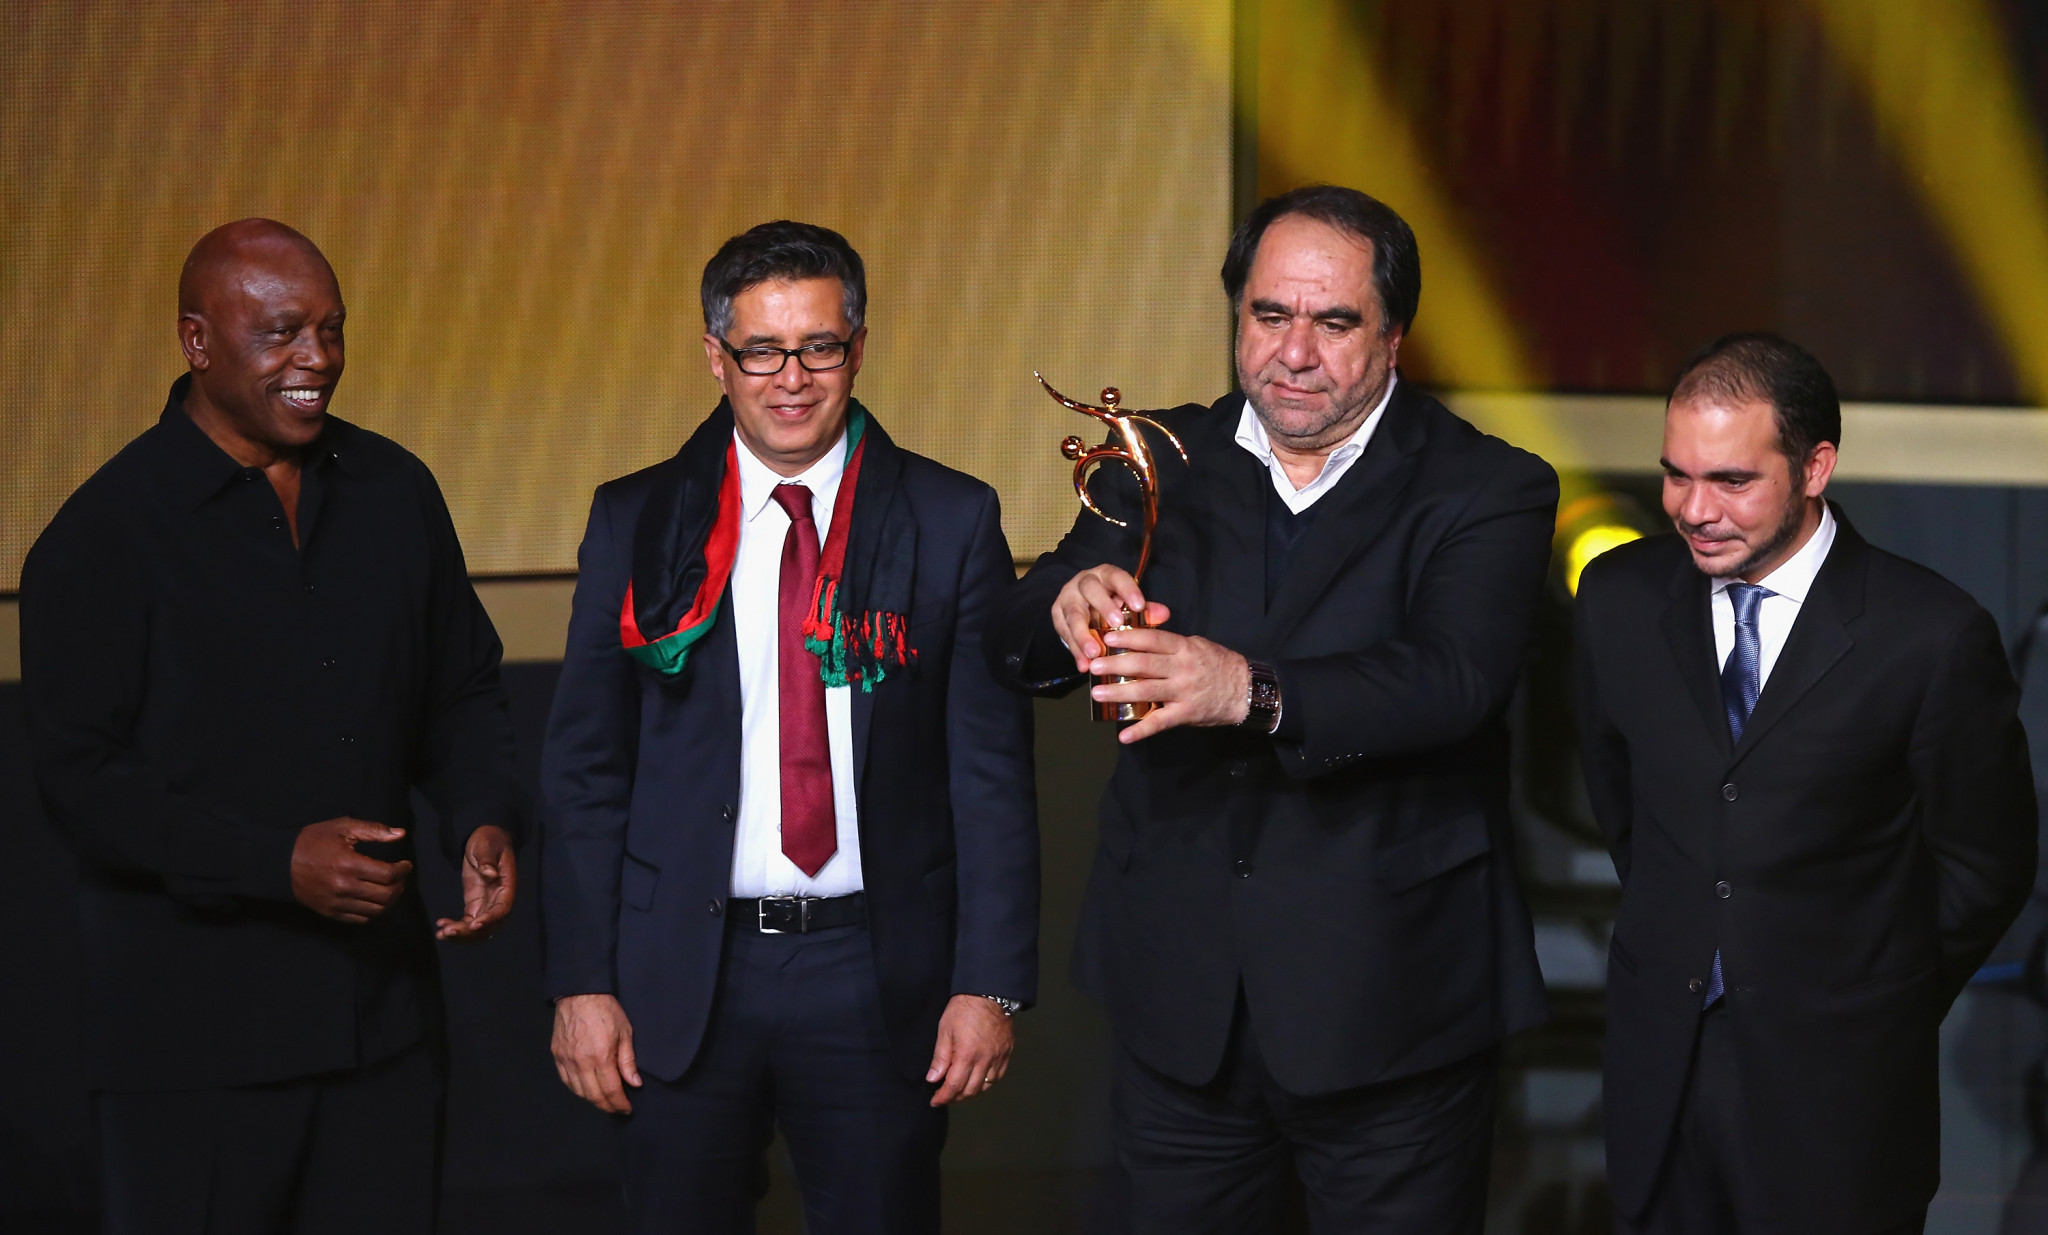 Afghanistan Football Federation President Keramuudin Karim, second from right. has been found guilty of sexually abusing female players and abusing his position ©Steffan Schmidt